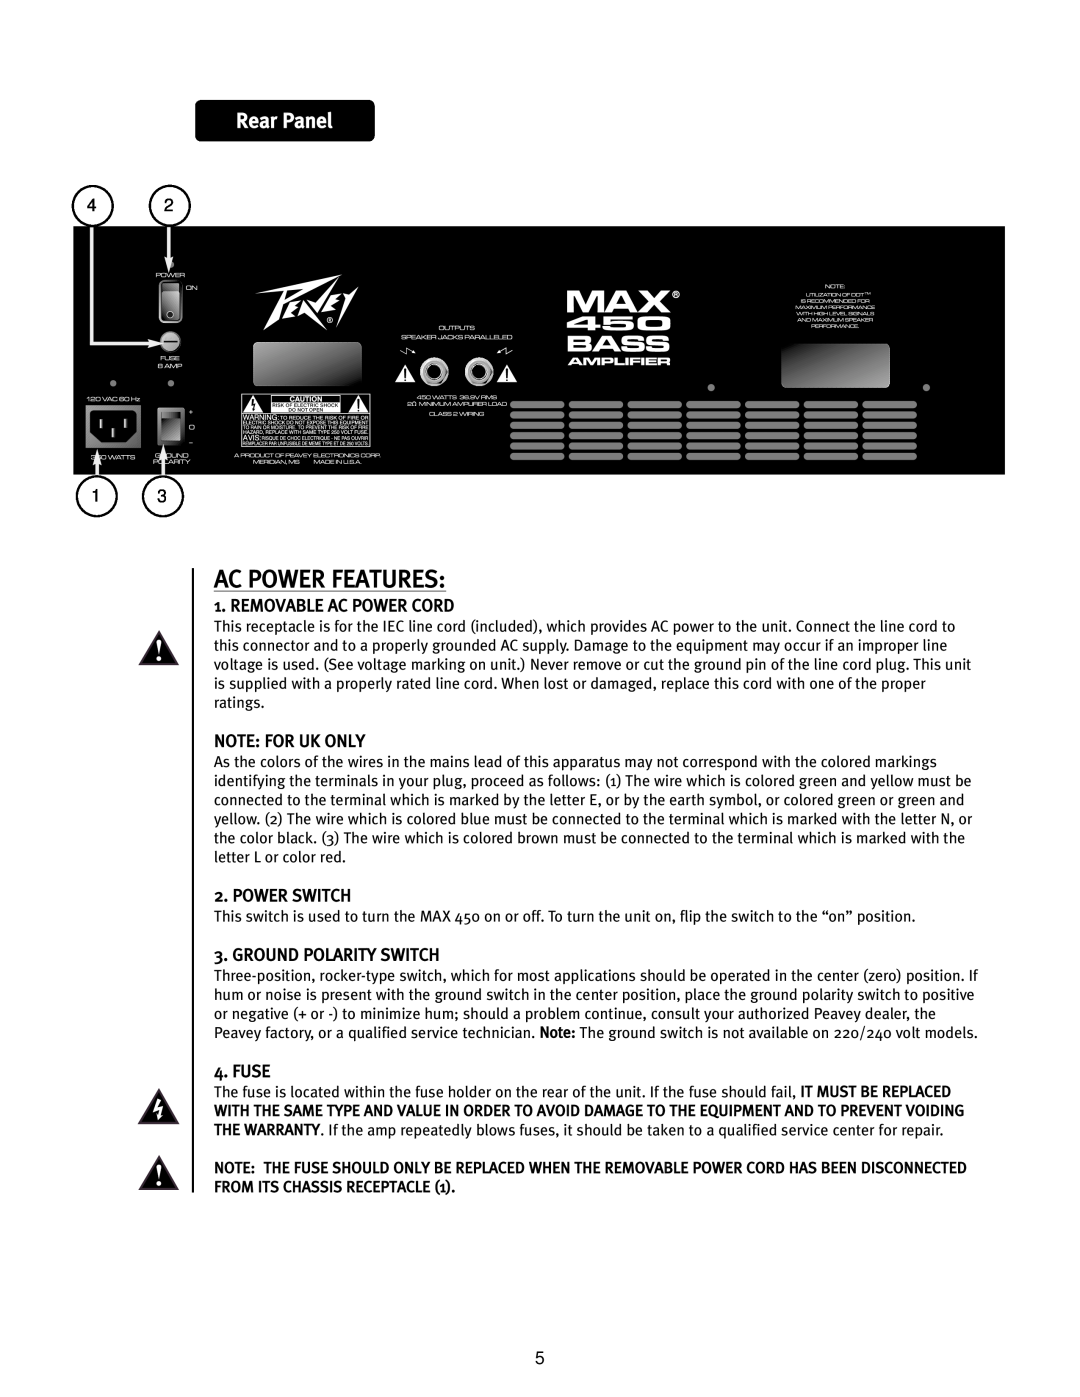 Peavey 450 operation manual Ac Power Features, Rear Panel 